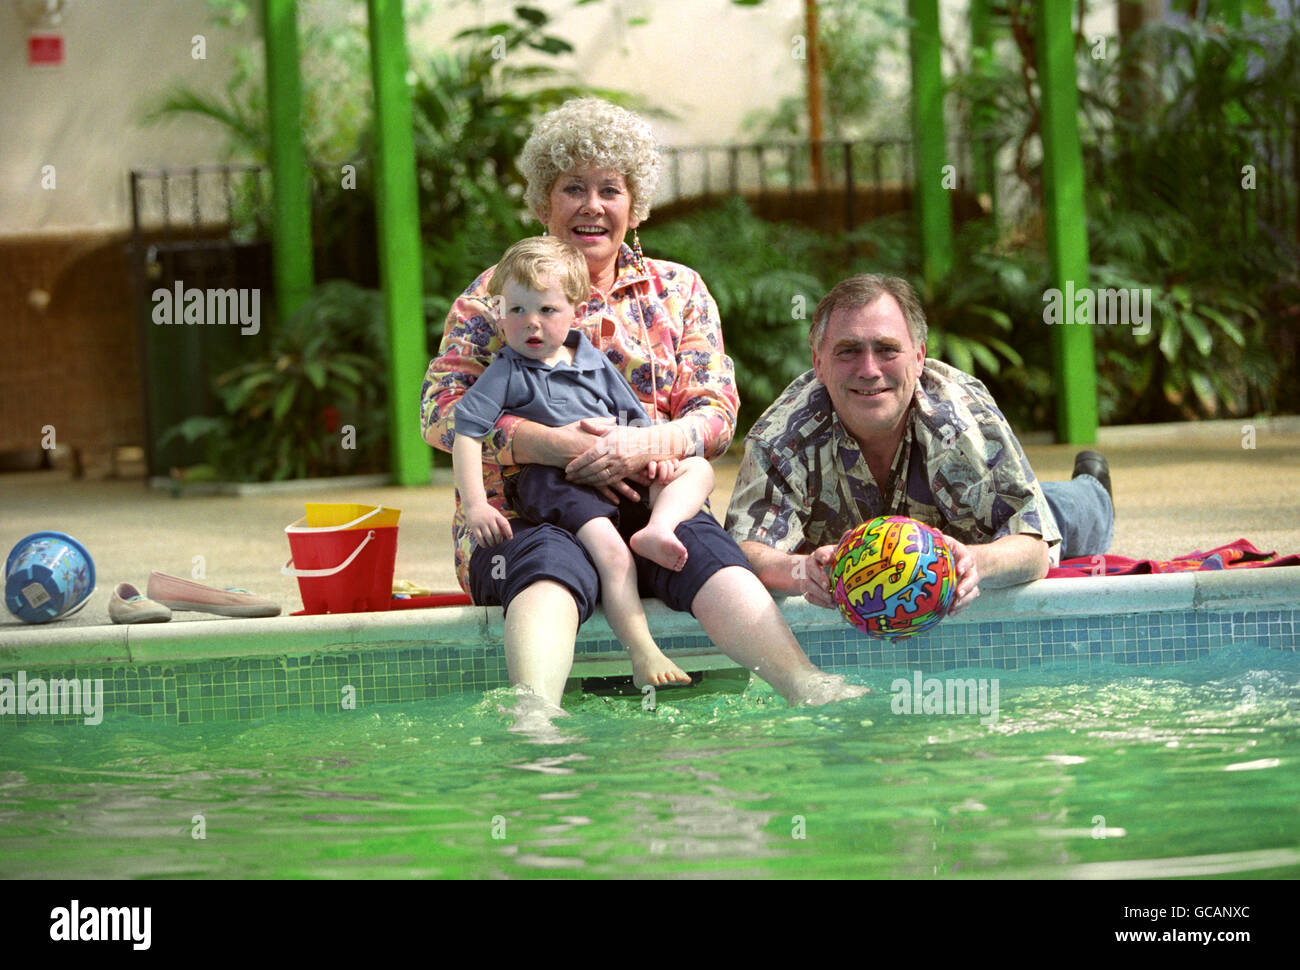 JACK & VERA DUCKWORTH (BILL TARMEY & ELIZABETH DAWN) WITH THEIR GRANDSON TOMMY (DARYL EDWARDS), HAVE A DIP IN THE POOL AT TALACRE CARAVAN PARK, NORTH WALES, DURING FILMING FOR ITV. Stock Photo